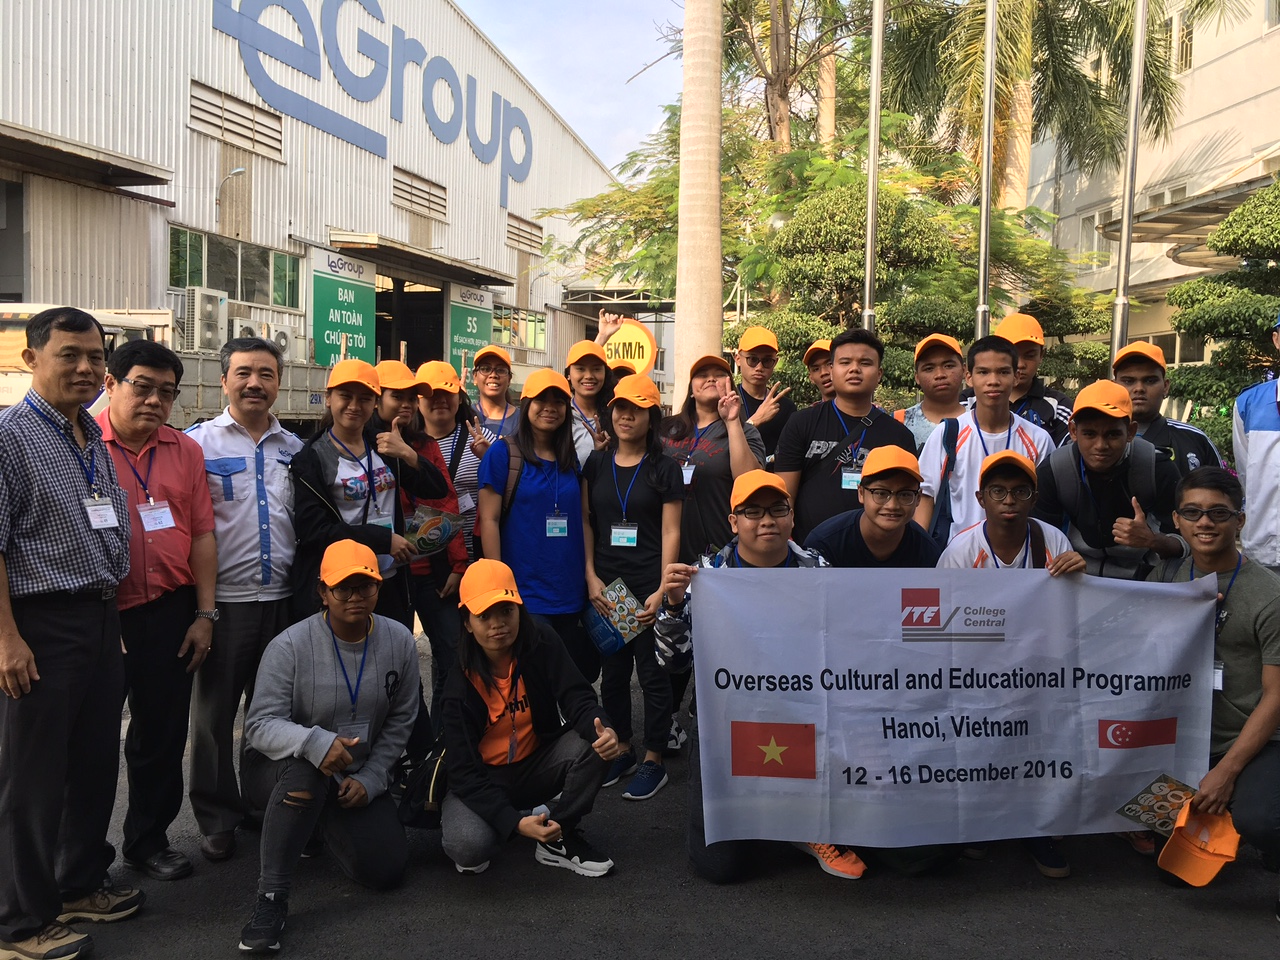 Students from the Singapore Institute of Technical Education (ITE) visit LeGroup in their field trip to Vietnam.